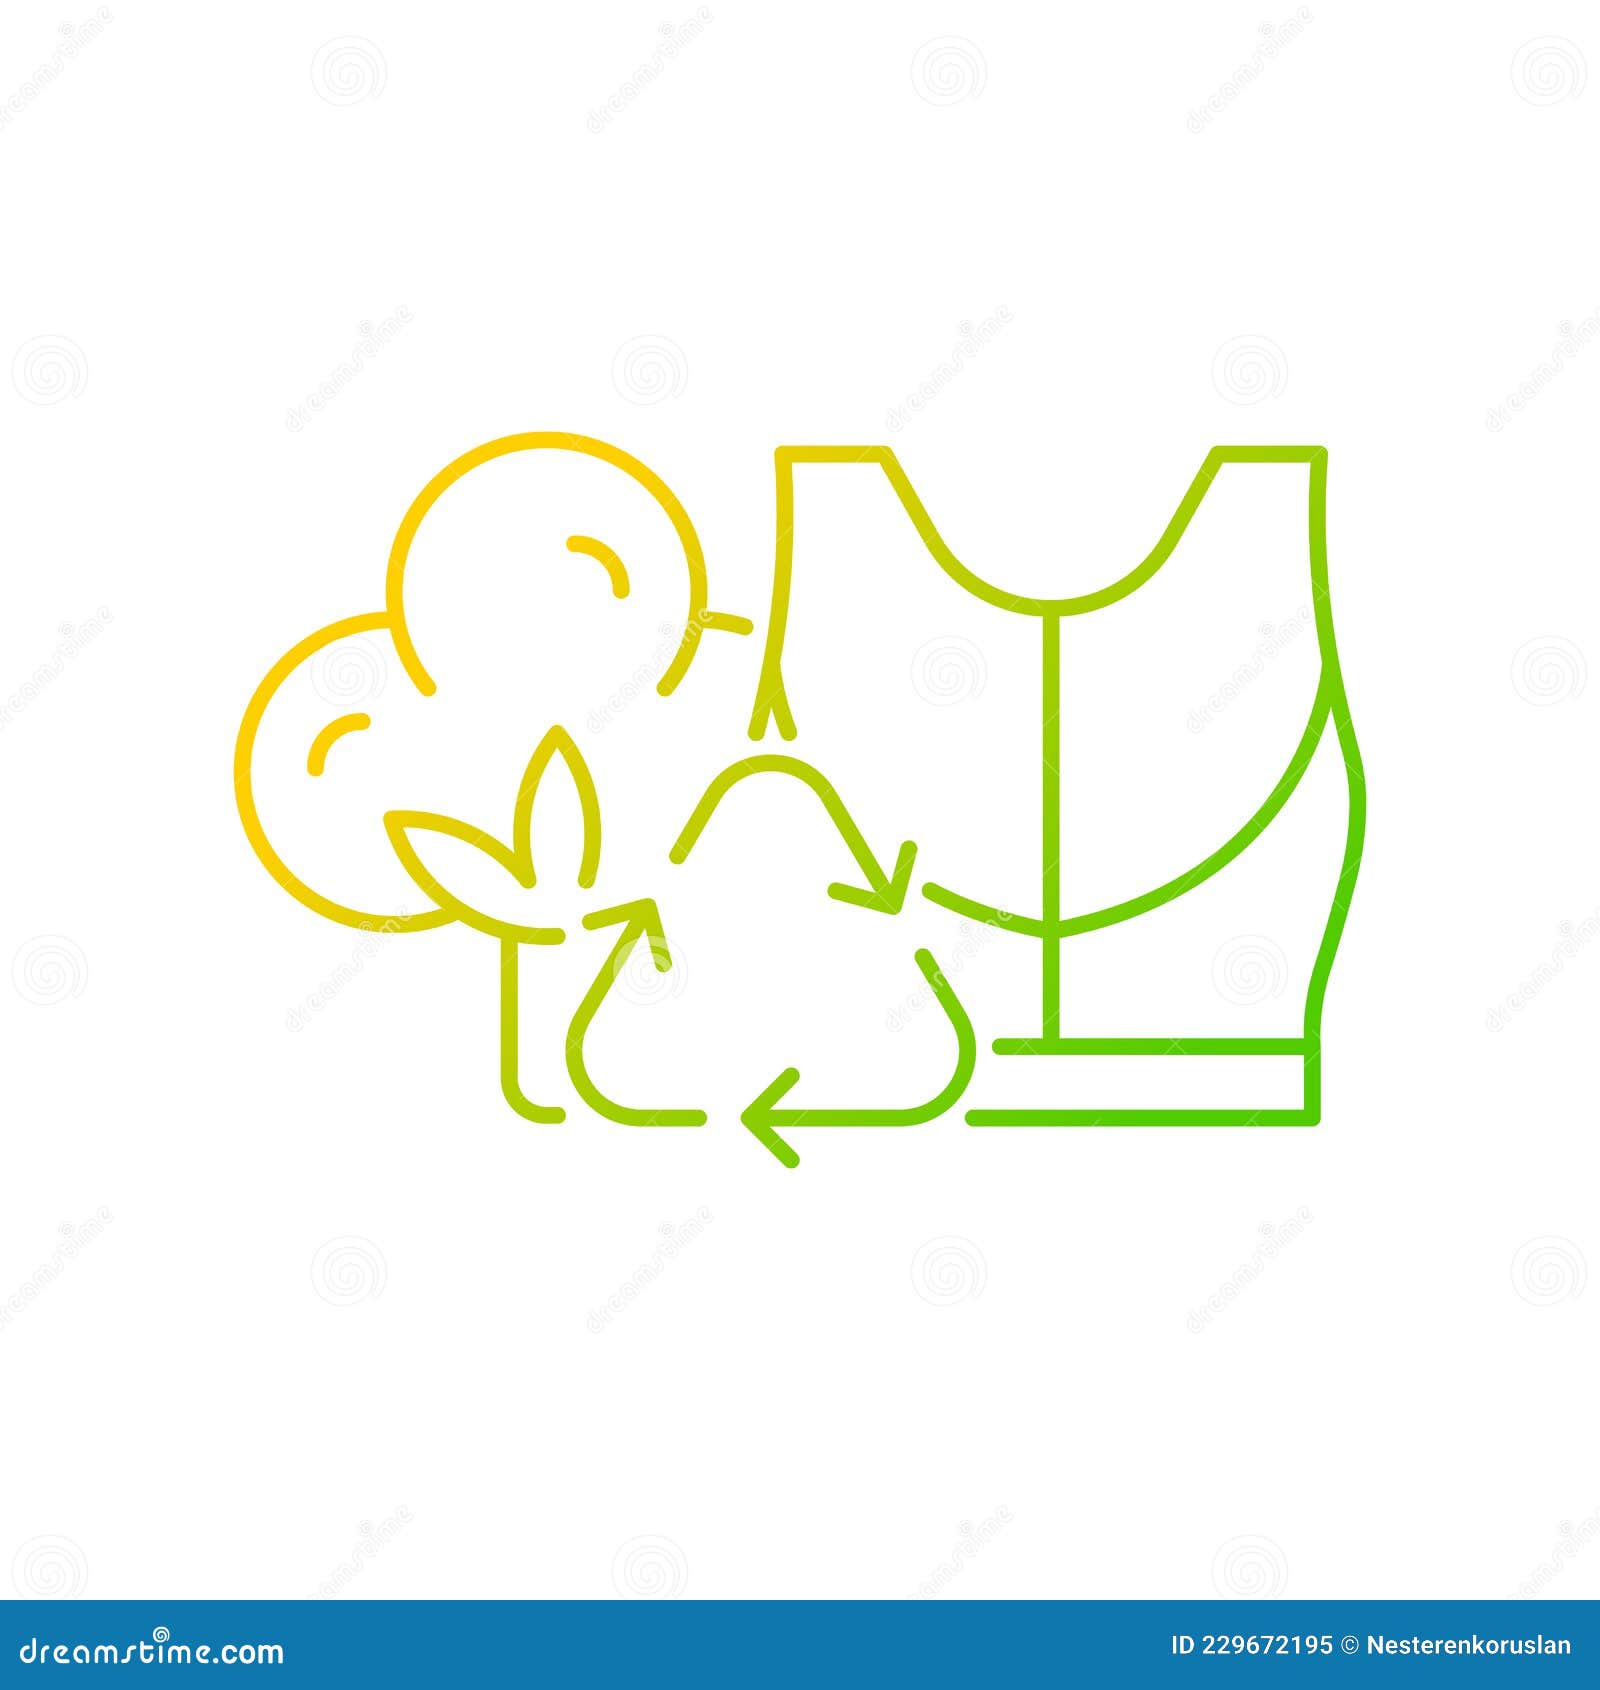 Activewear Linear Stock Illustrations – 81 Activewear Linear Stock  Illustrations, Vectors & Clipart - Dreamstime